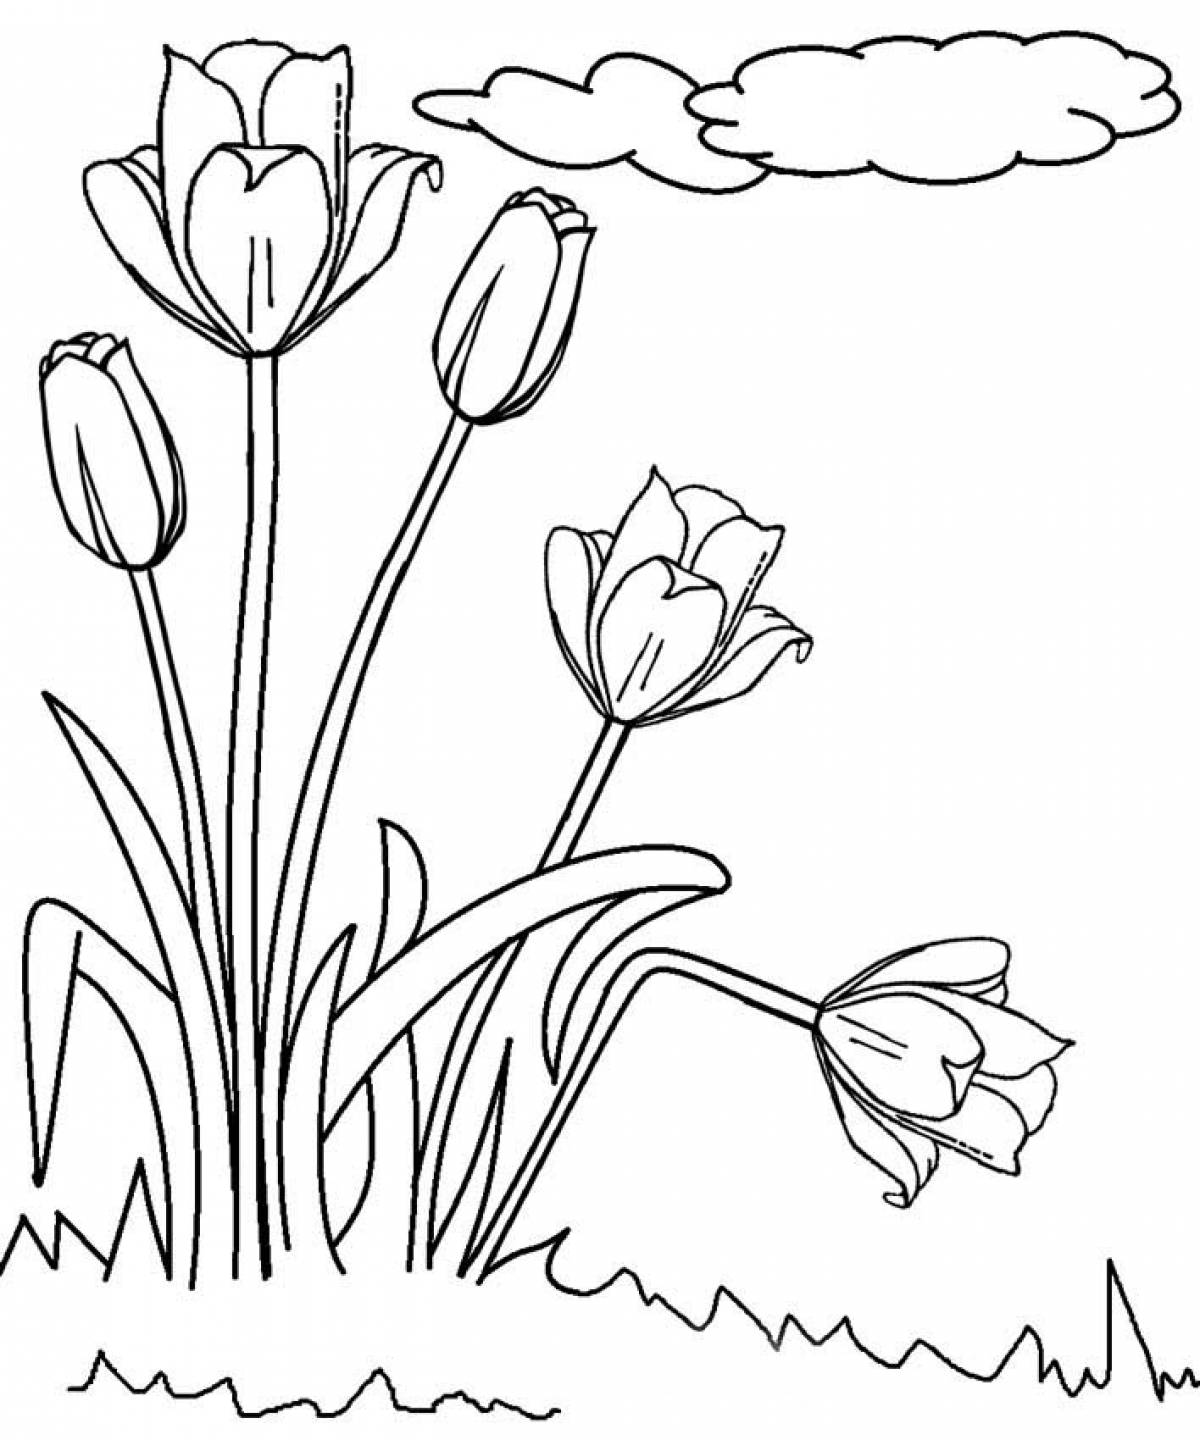 Tulips and clouds